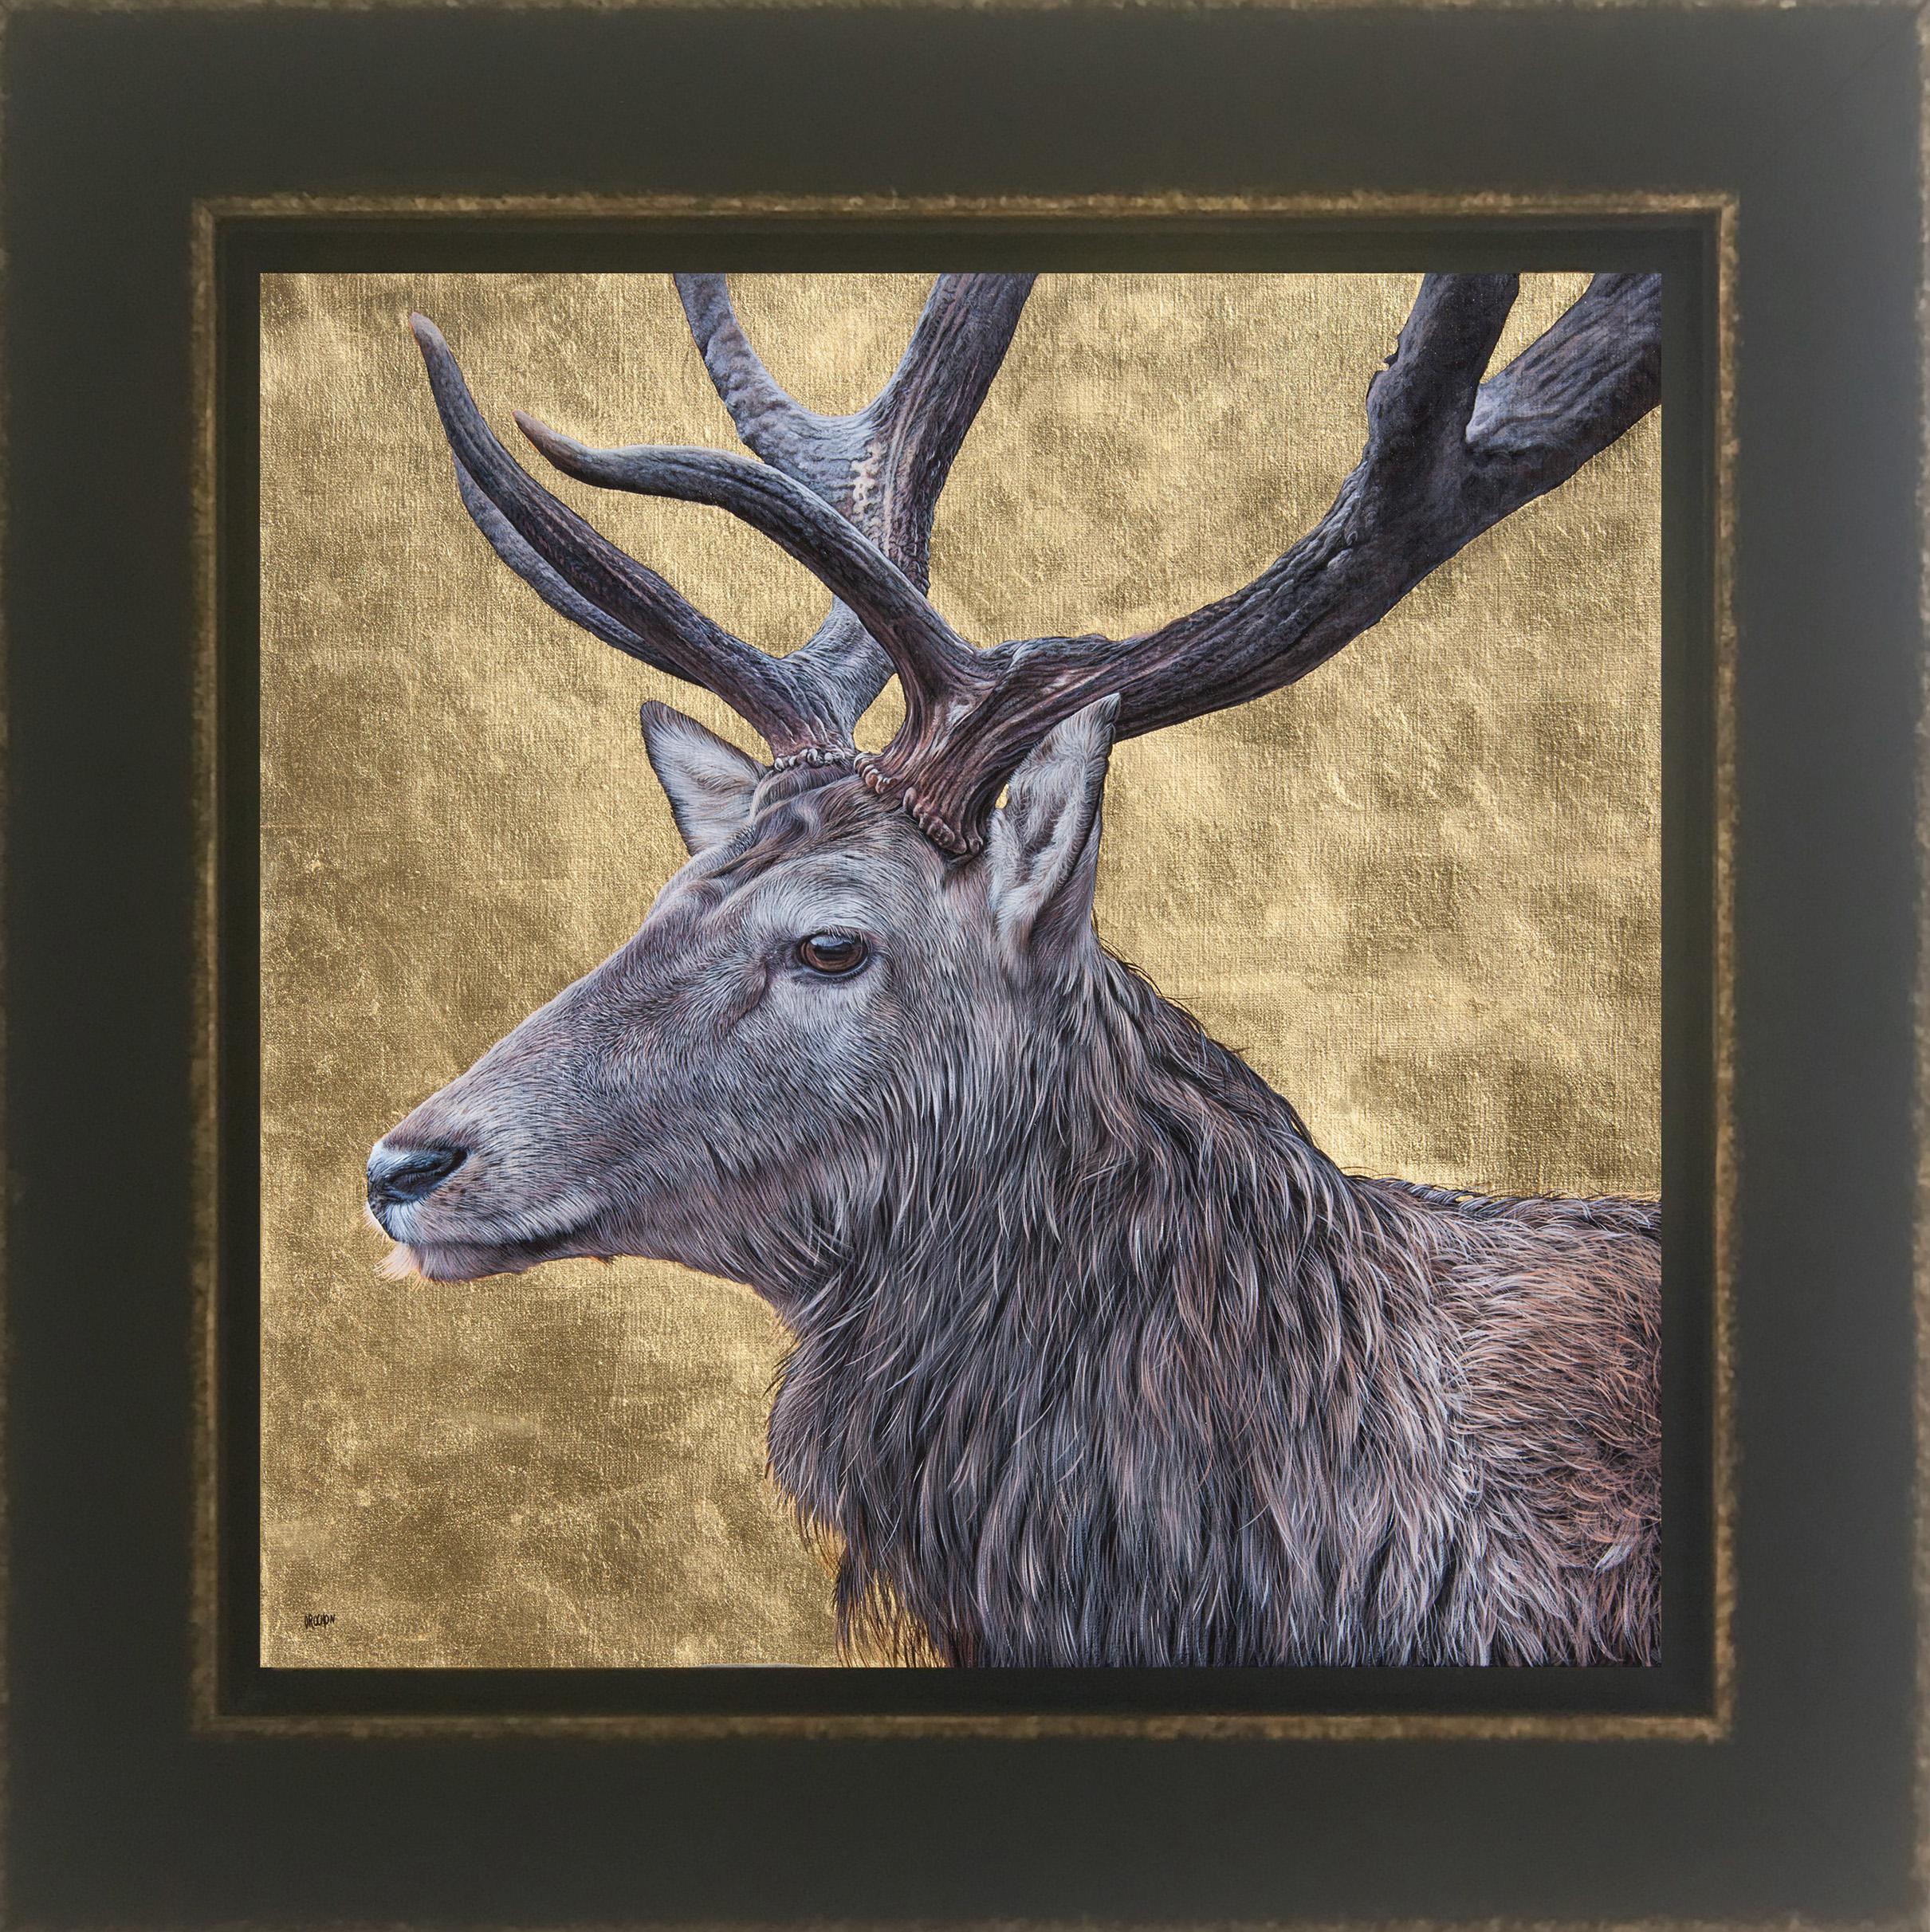 L'IMMORTEL, Cerf  - Painting by Christophe Drochon